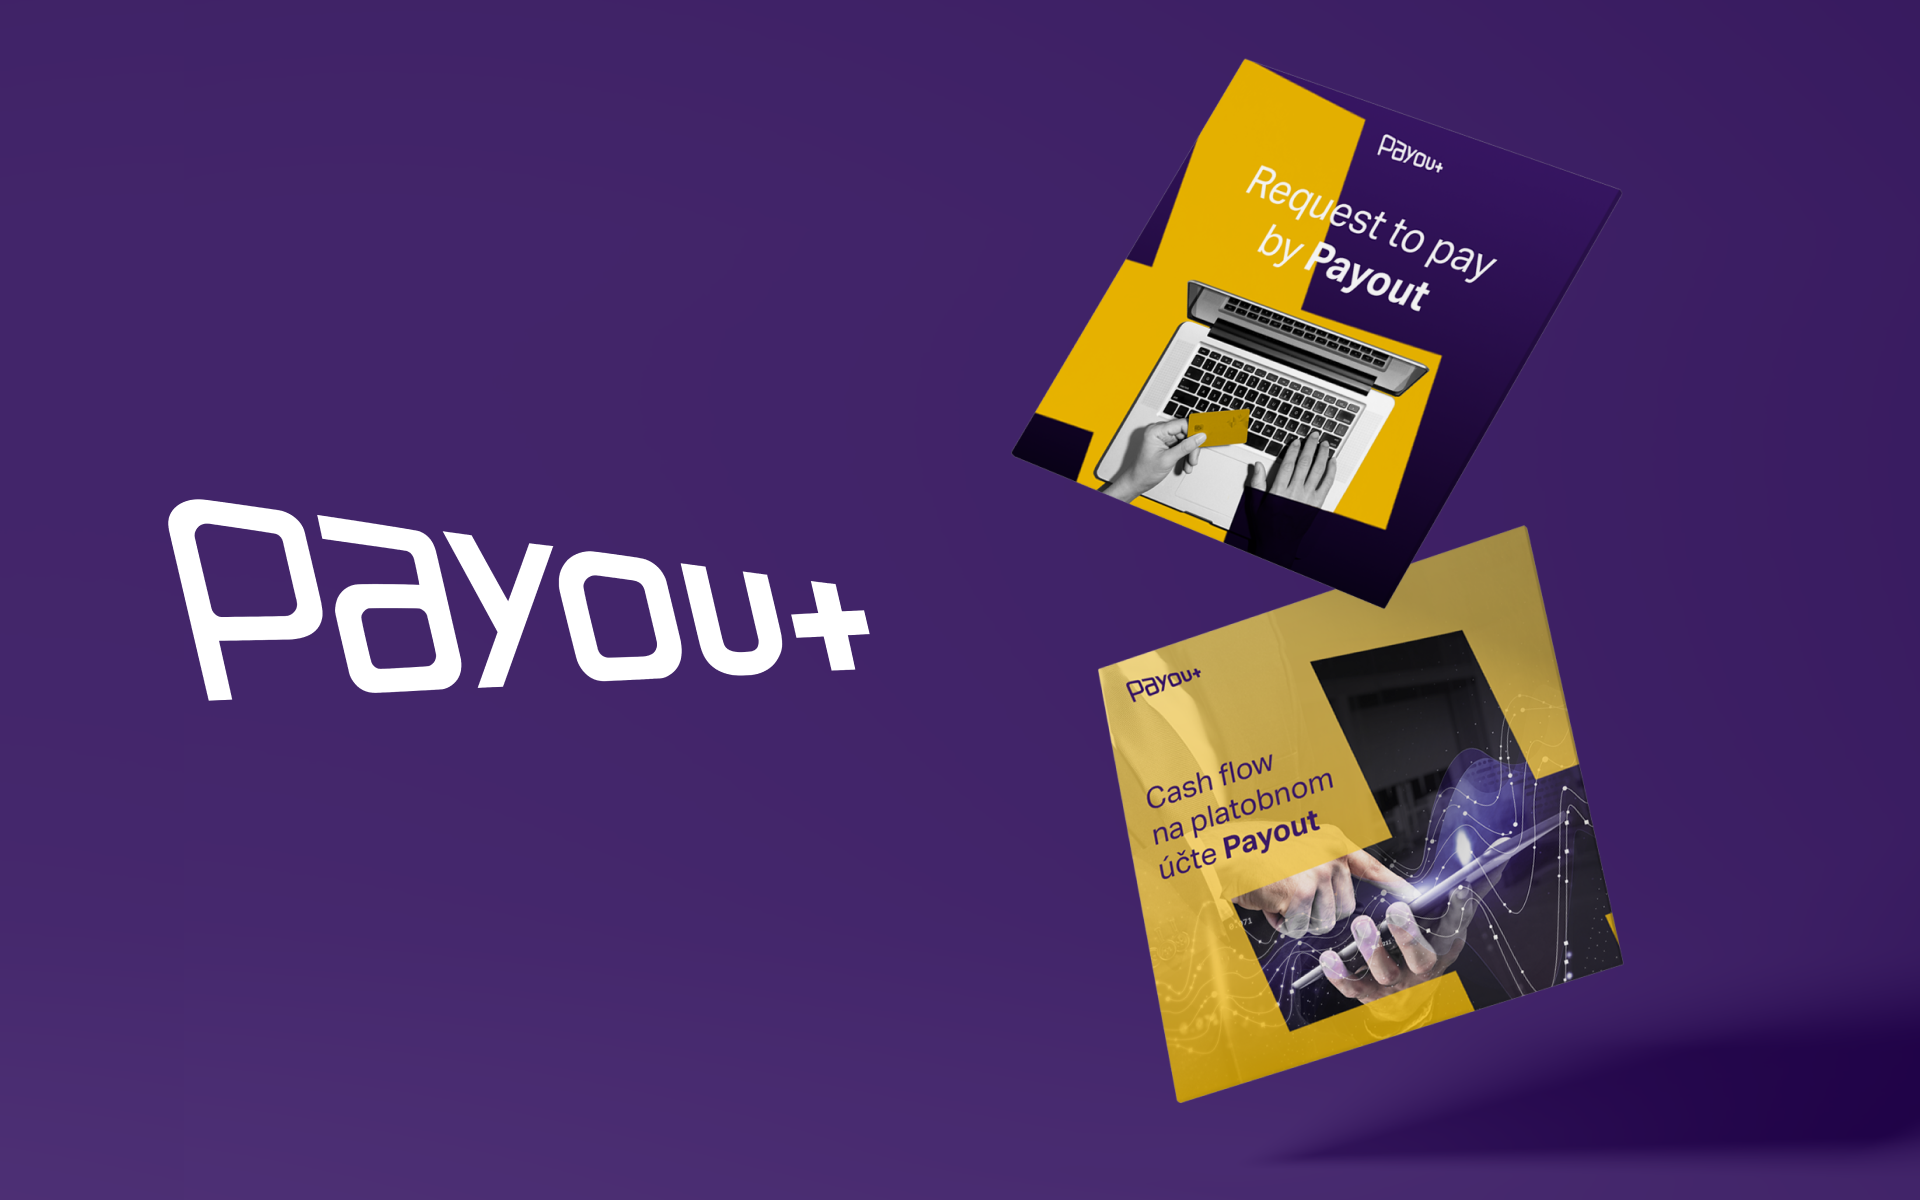 Payout payment gateway Promiseo